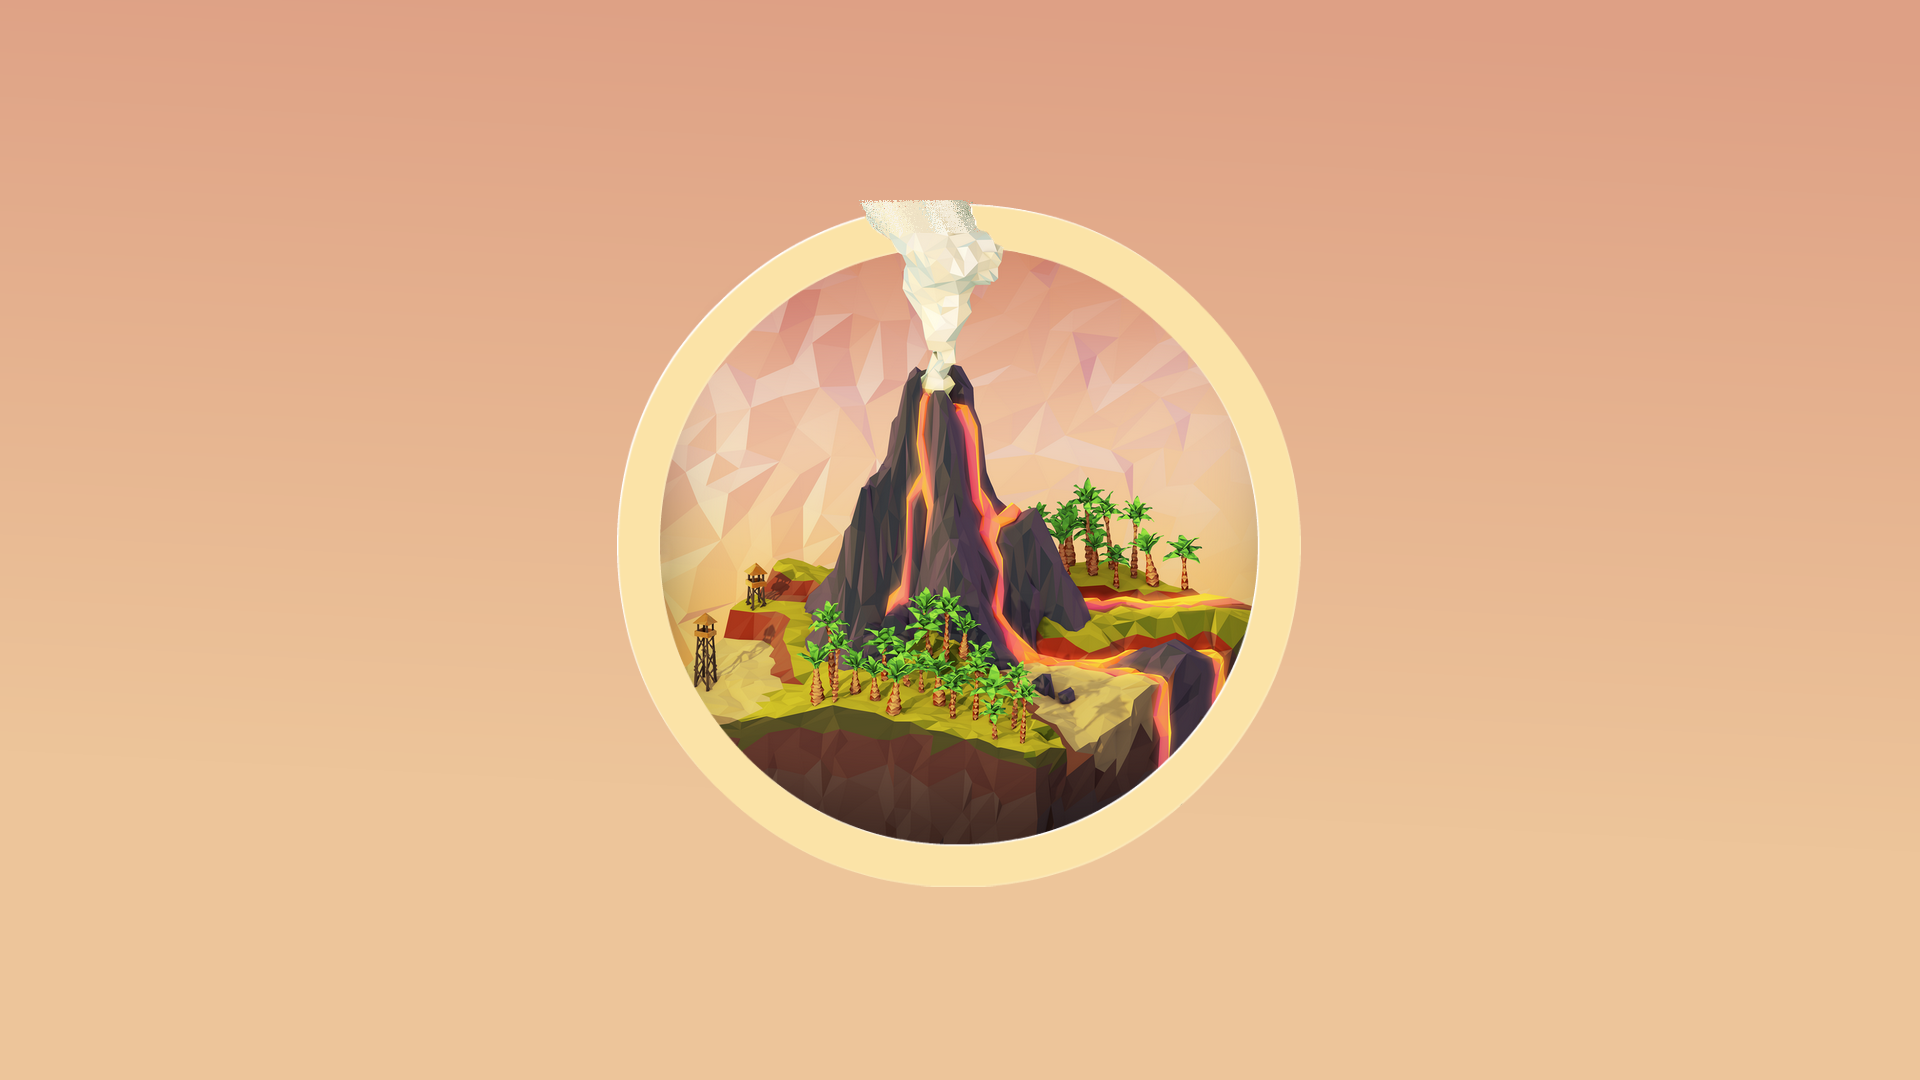 General 1920x1080 digital art minimalism nature simple background palm trees volcano eruption lava smoke low poly circle tower beige beige background gradient